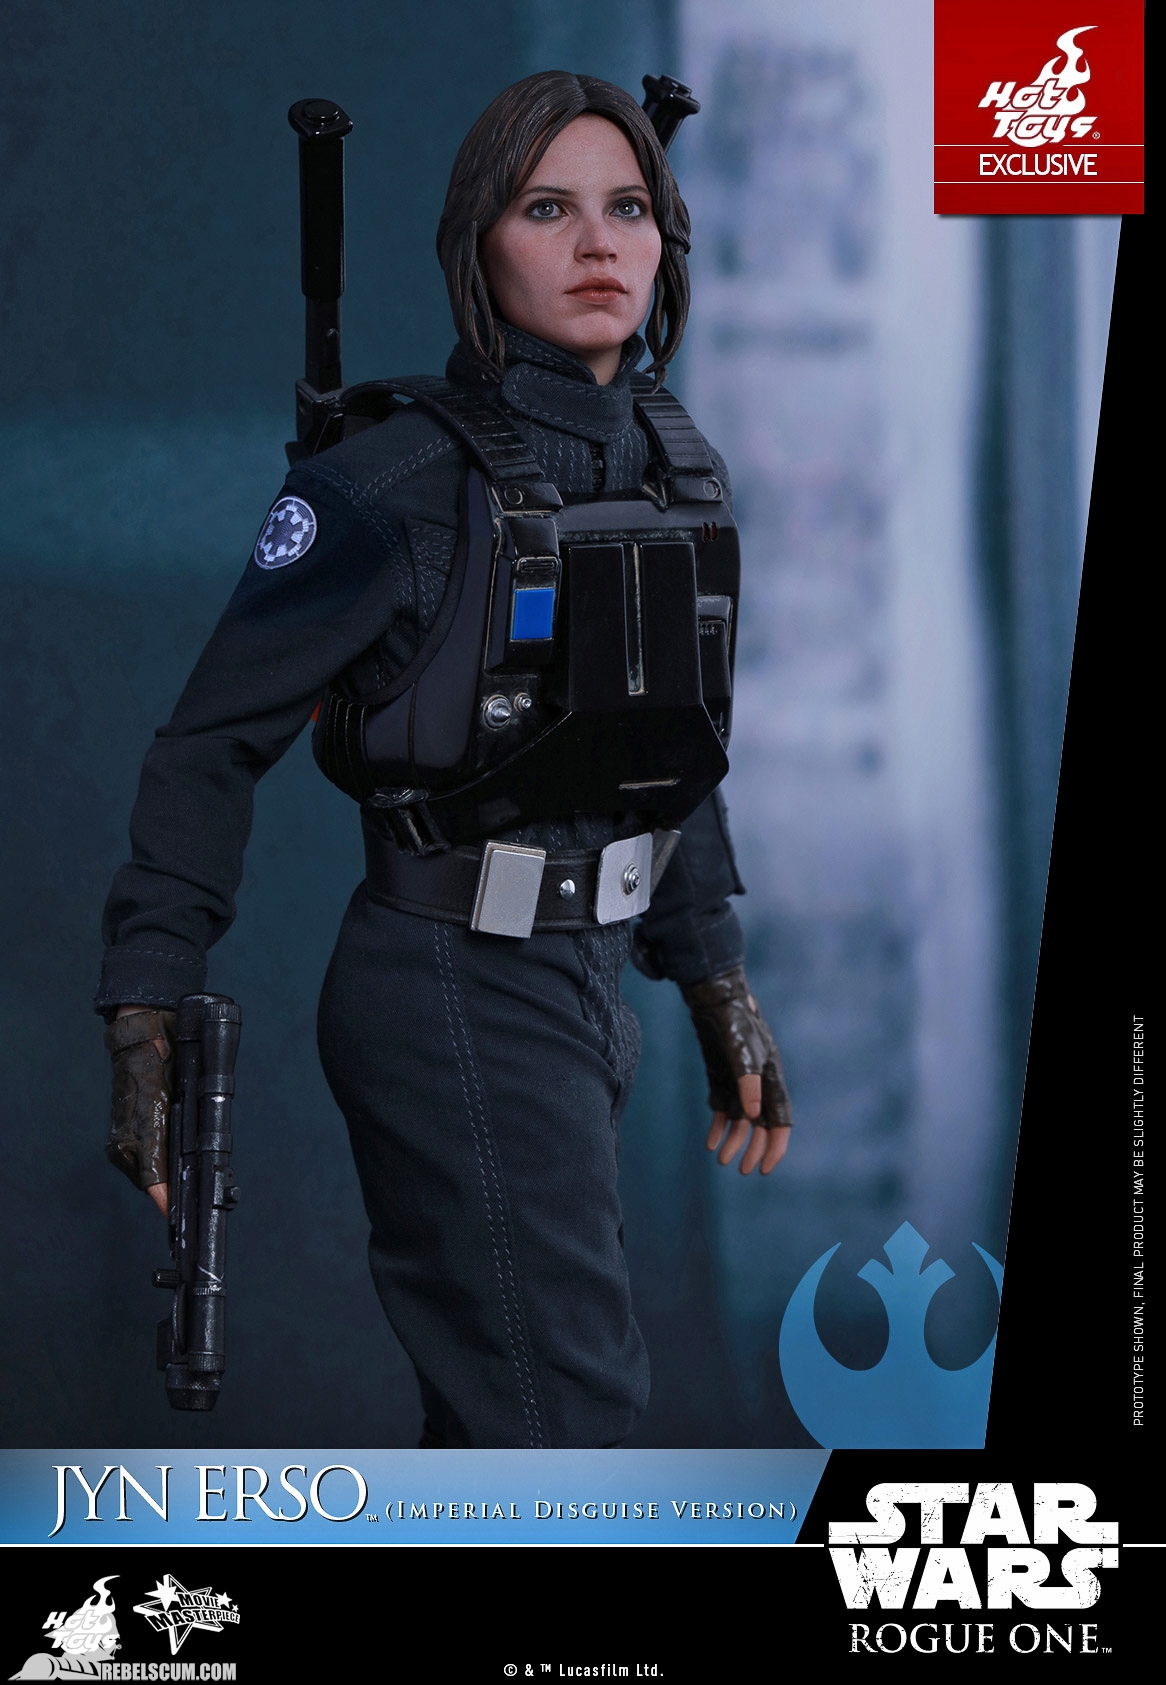 Hot-Toys-MMS419-Rogue-One-Jyn-Erso-Imperial-Disguise-005.jpg